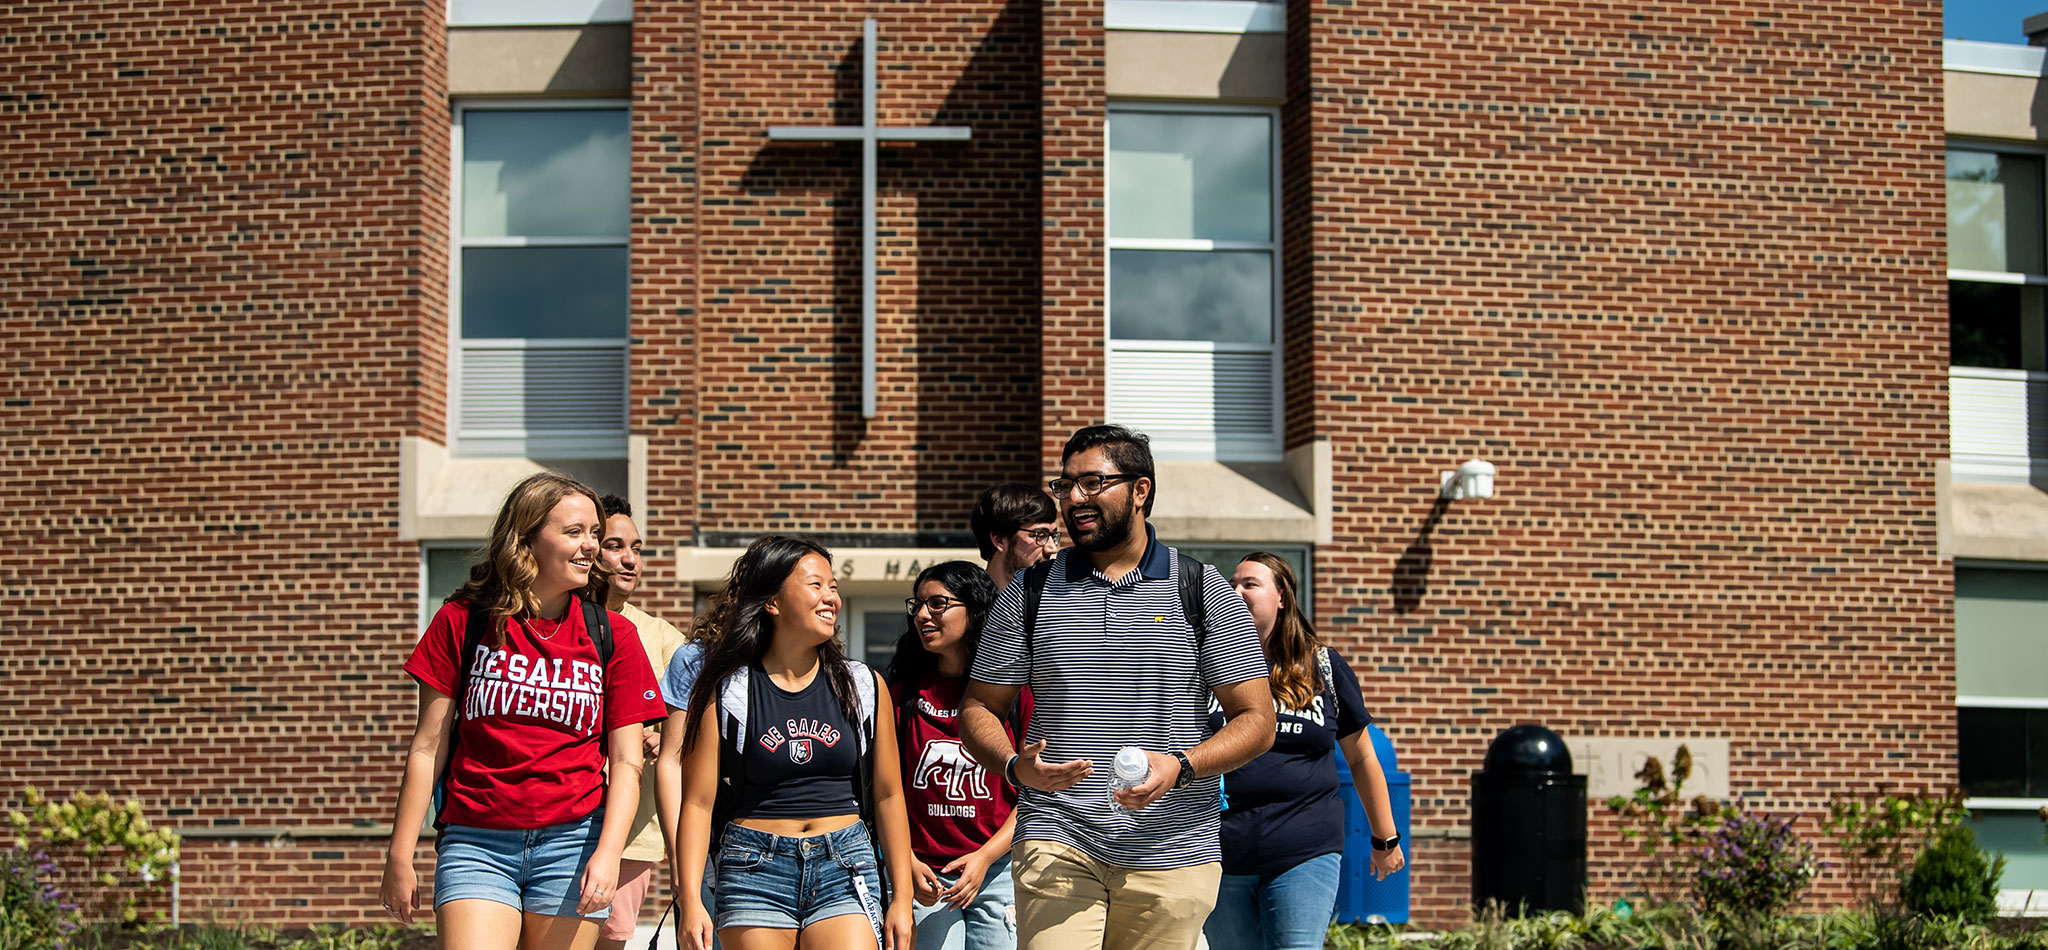 A group of DeSales University students walking, smiling and laughing.